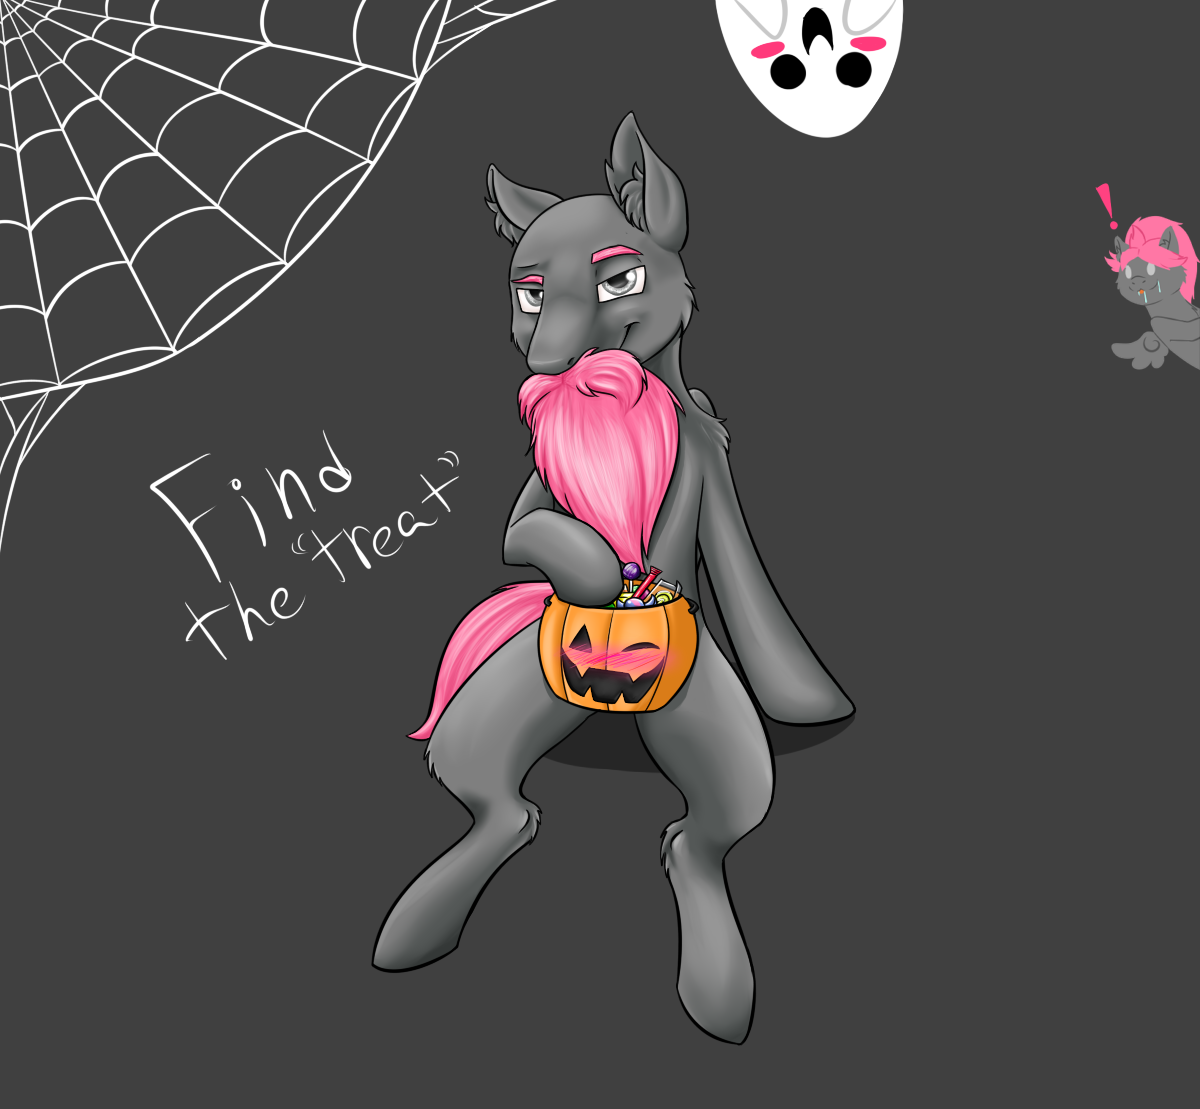 lovable-java:   Trick or treat, find the “treat”  Halloween gift art for ask-wbm